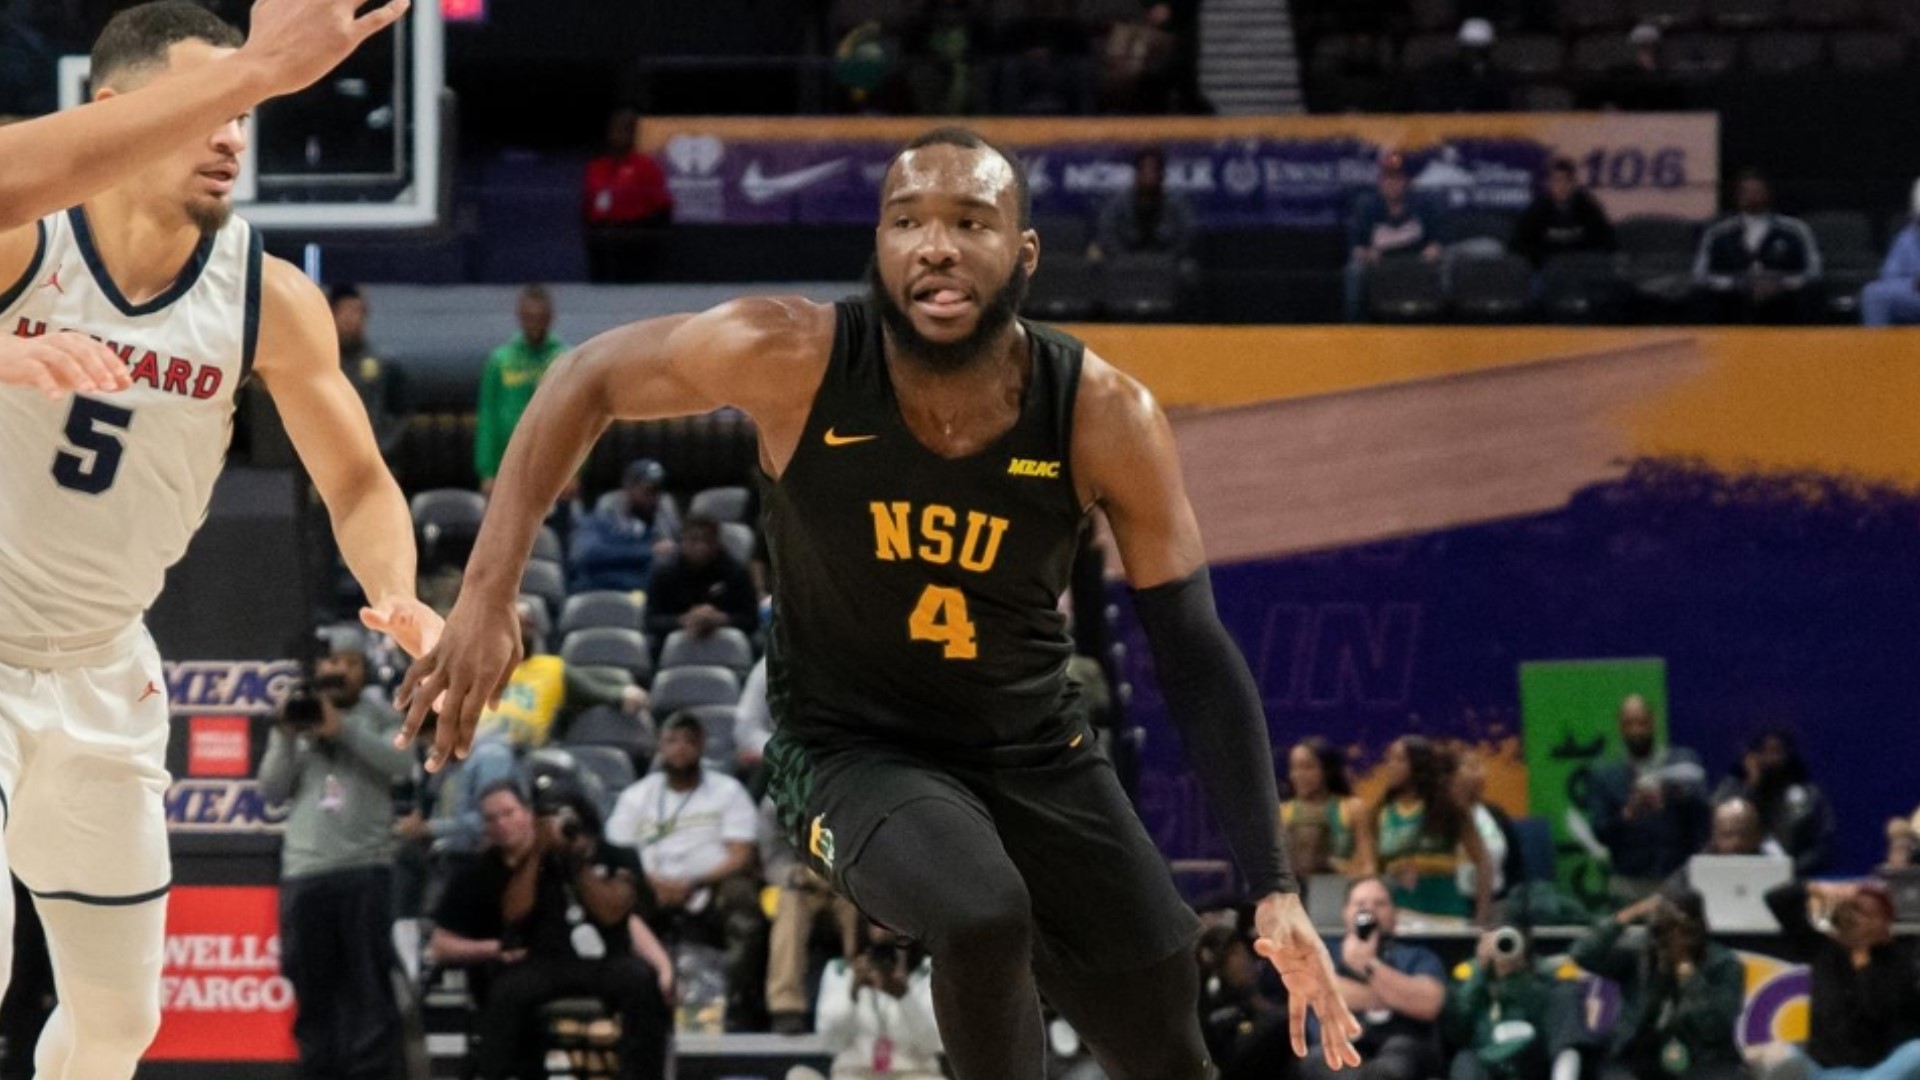 Norfolk State led 64-60 with less then 20 seconds remaining before the Bison hit a clutch three to put them within one, and two free throws to seal it.